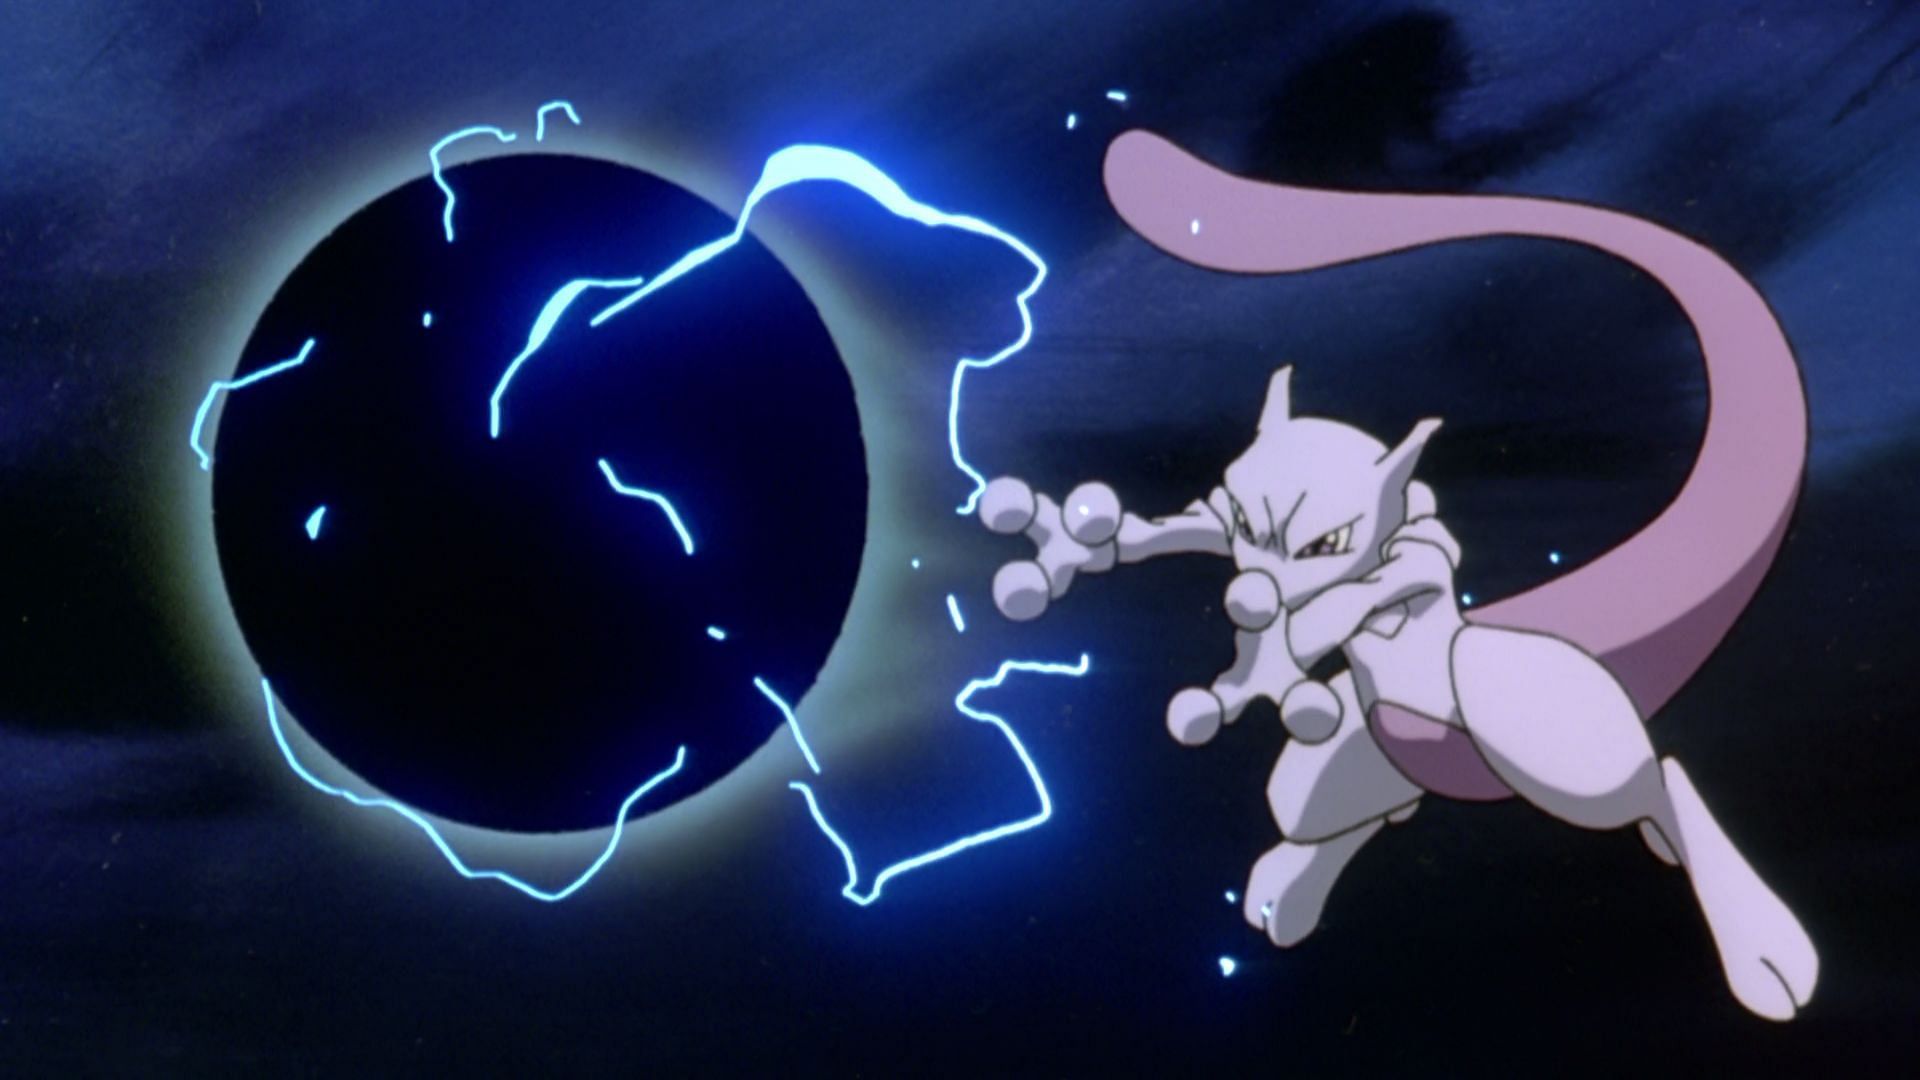 Even if it was born in a lab, Mewtwo knows how valuable life is (Image credit: OLM Incorporated, Pokemon The Movie: Mewtwo Strikes Back)